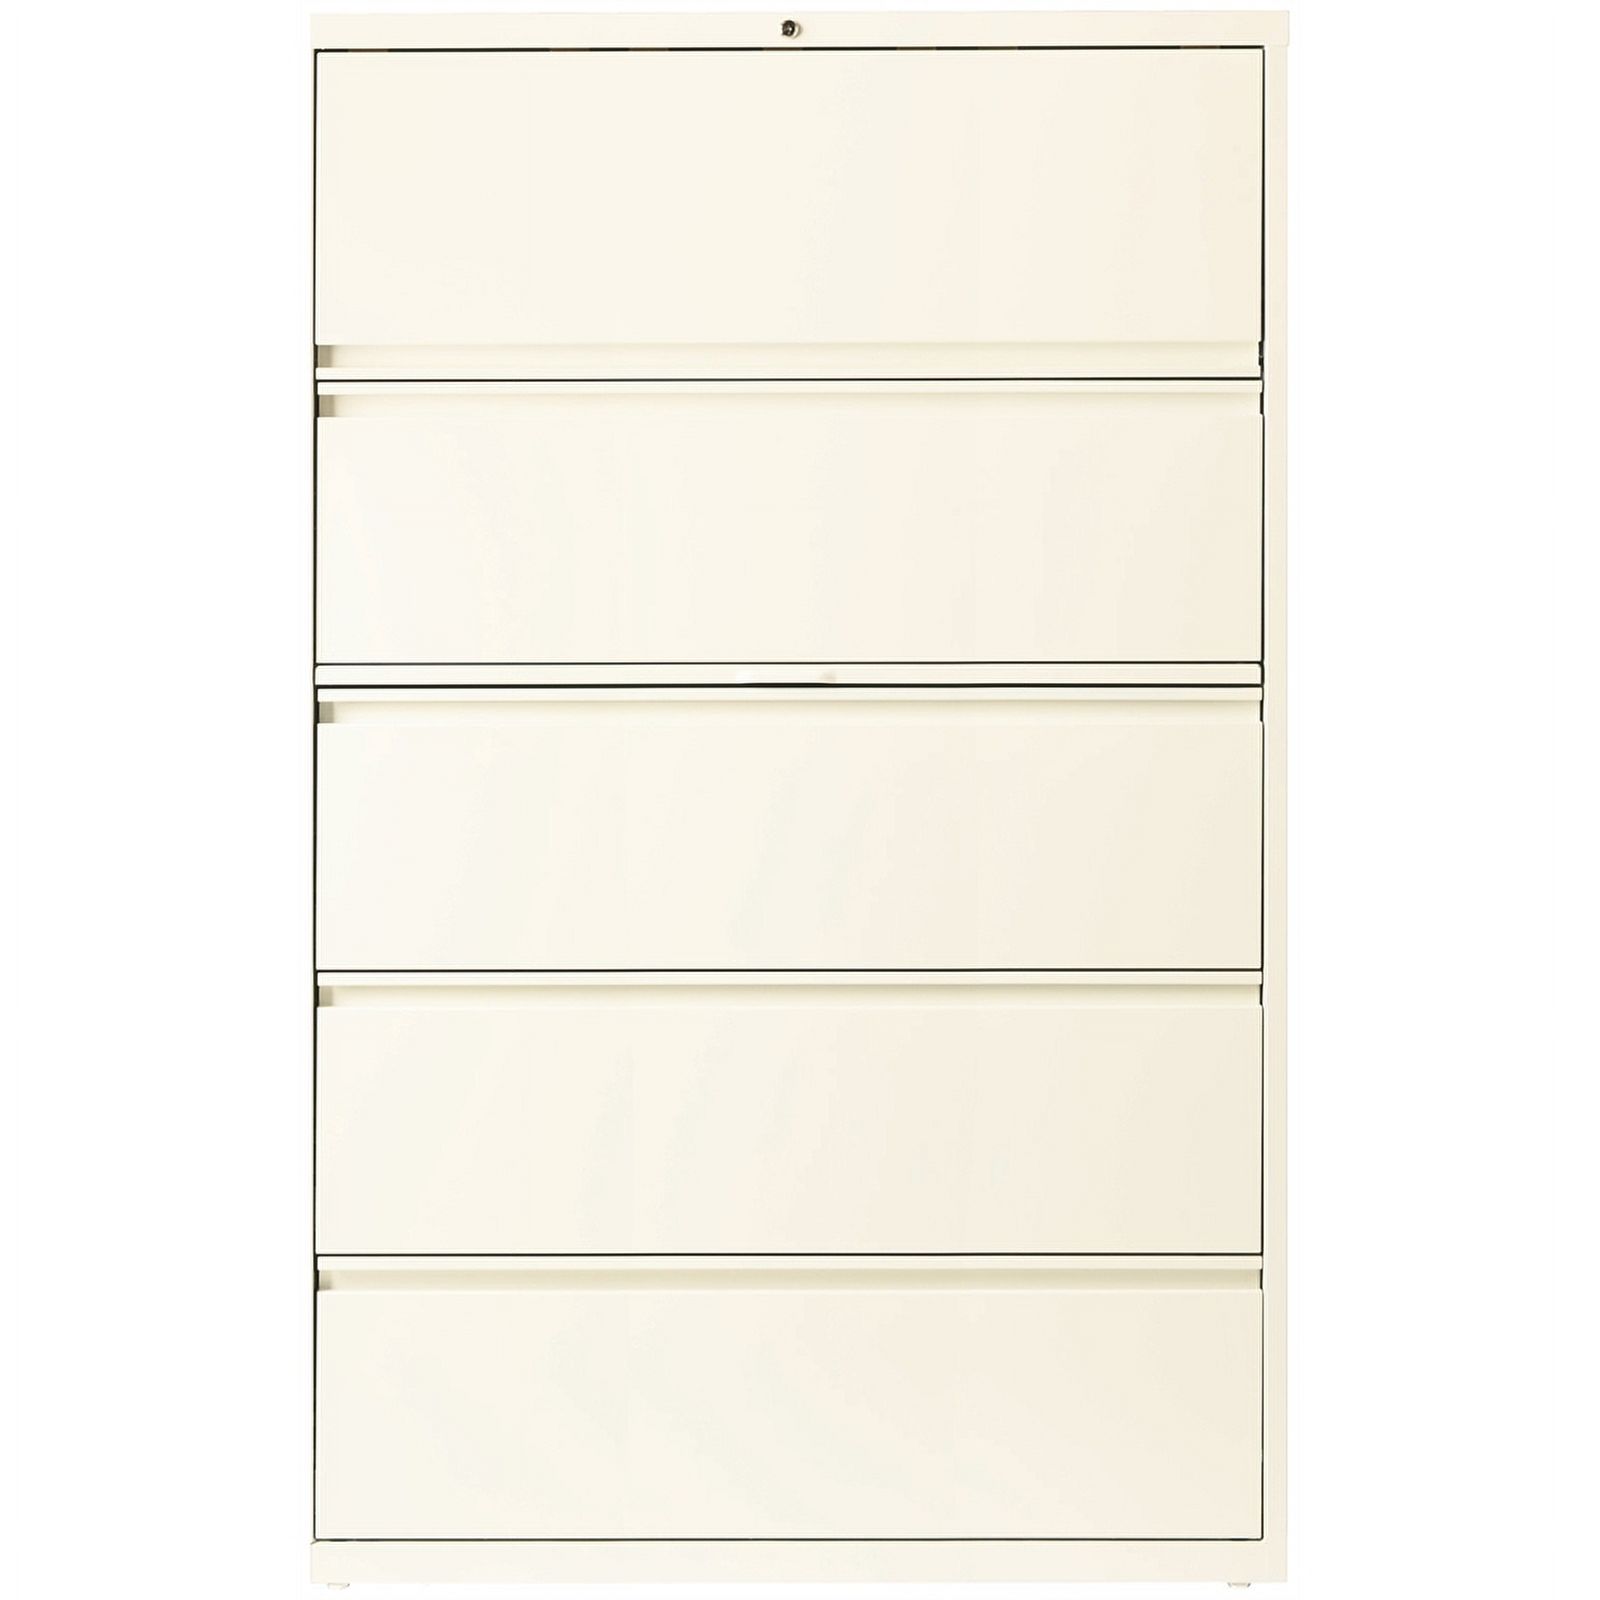 Scranton & Co 42" 5-Drawer Contemporary Metal Lateral File Cabinet in Off White - image 4 of 5